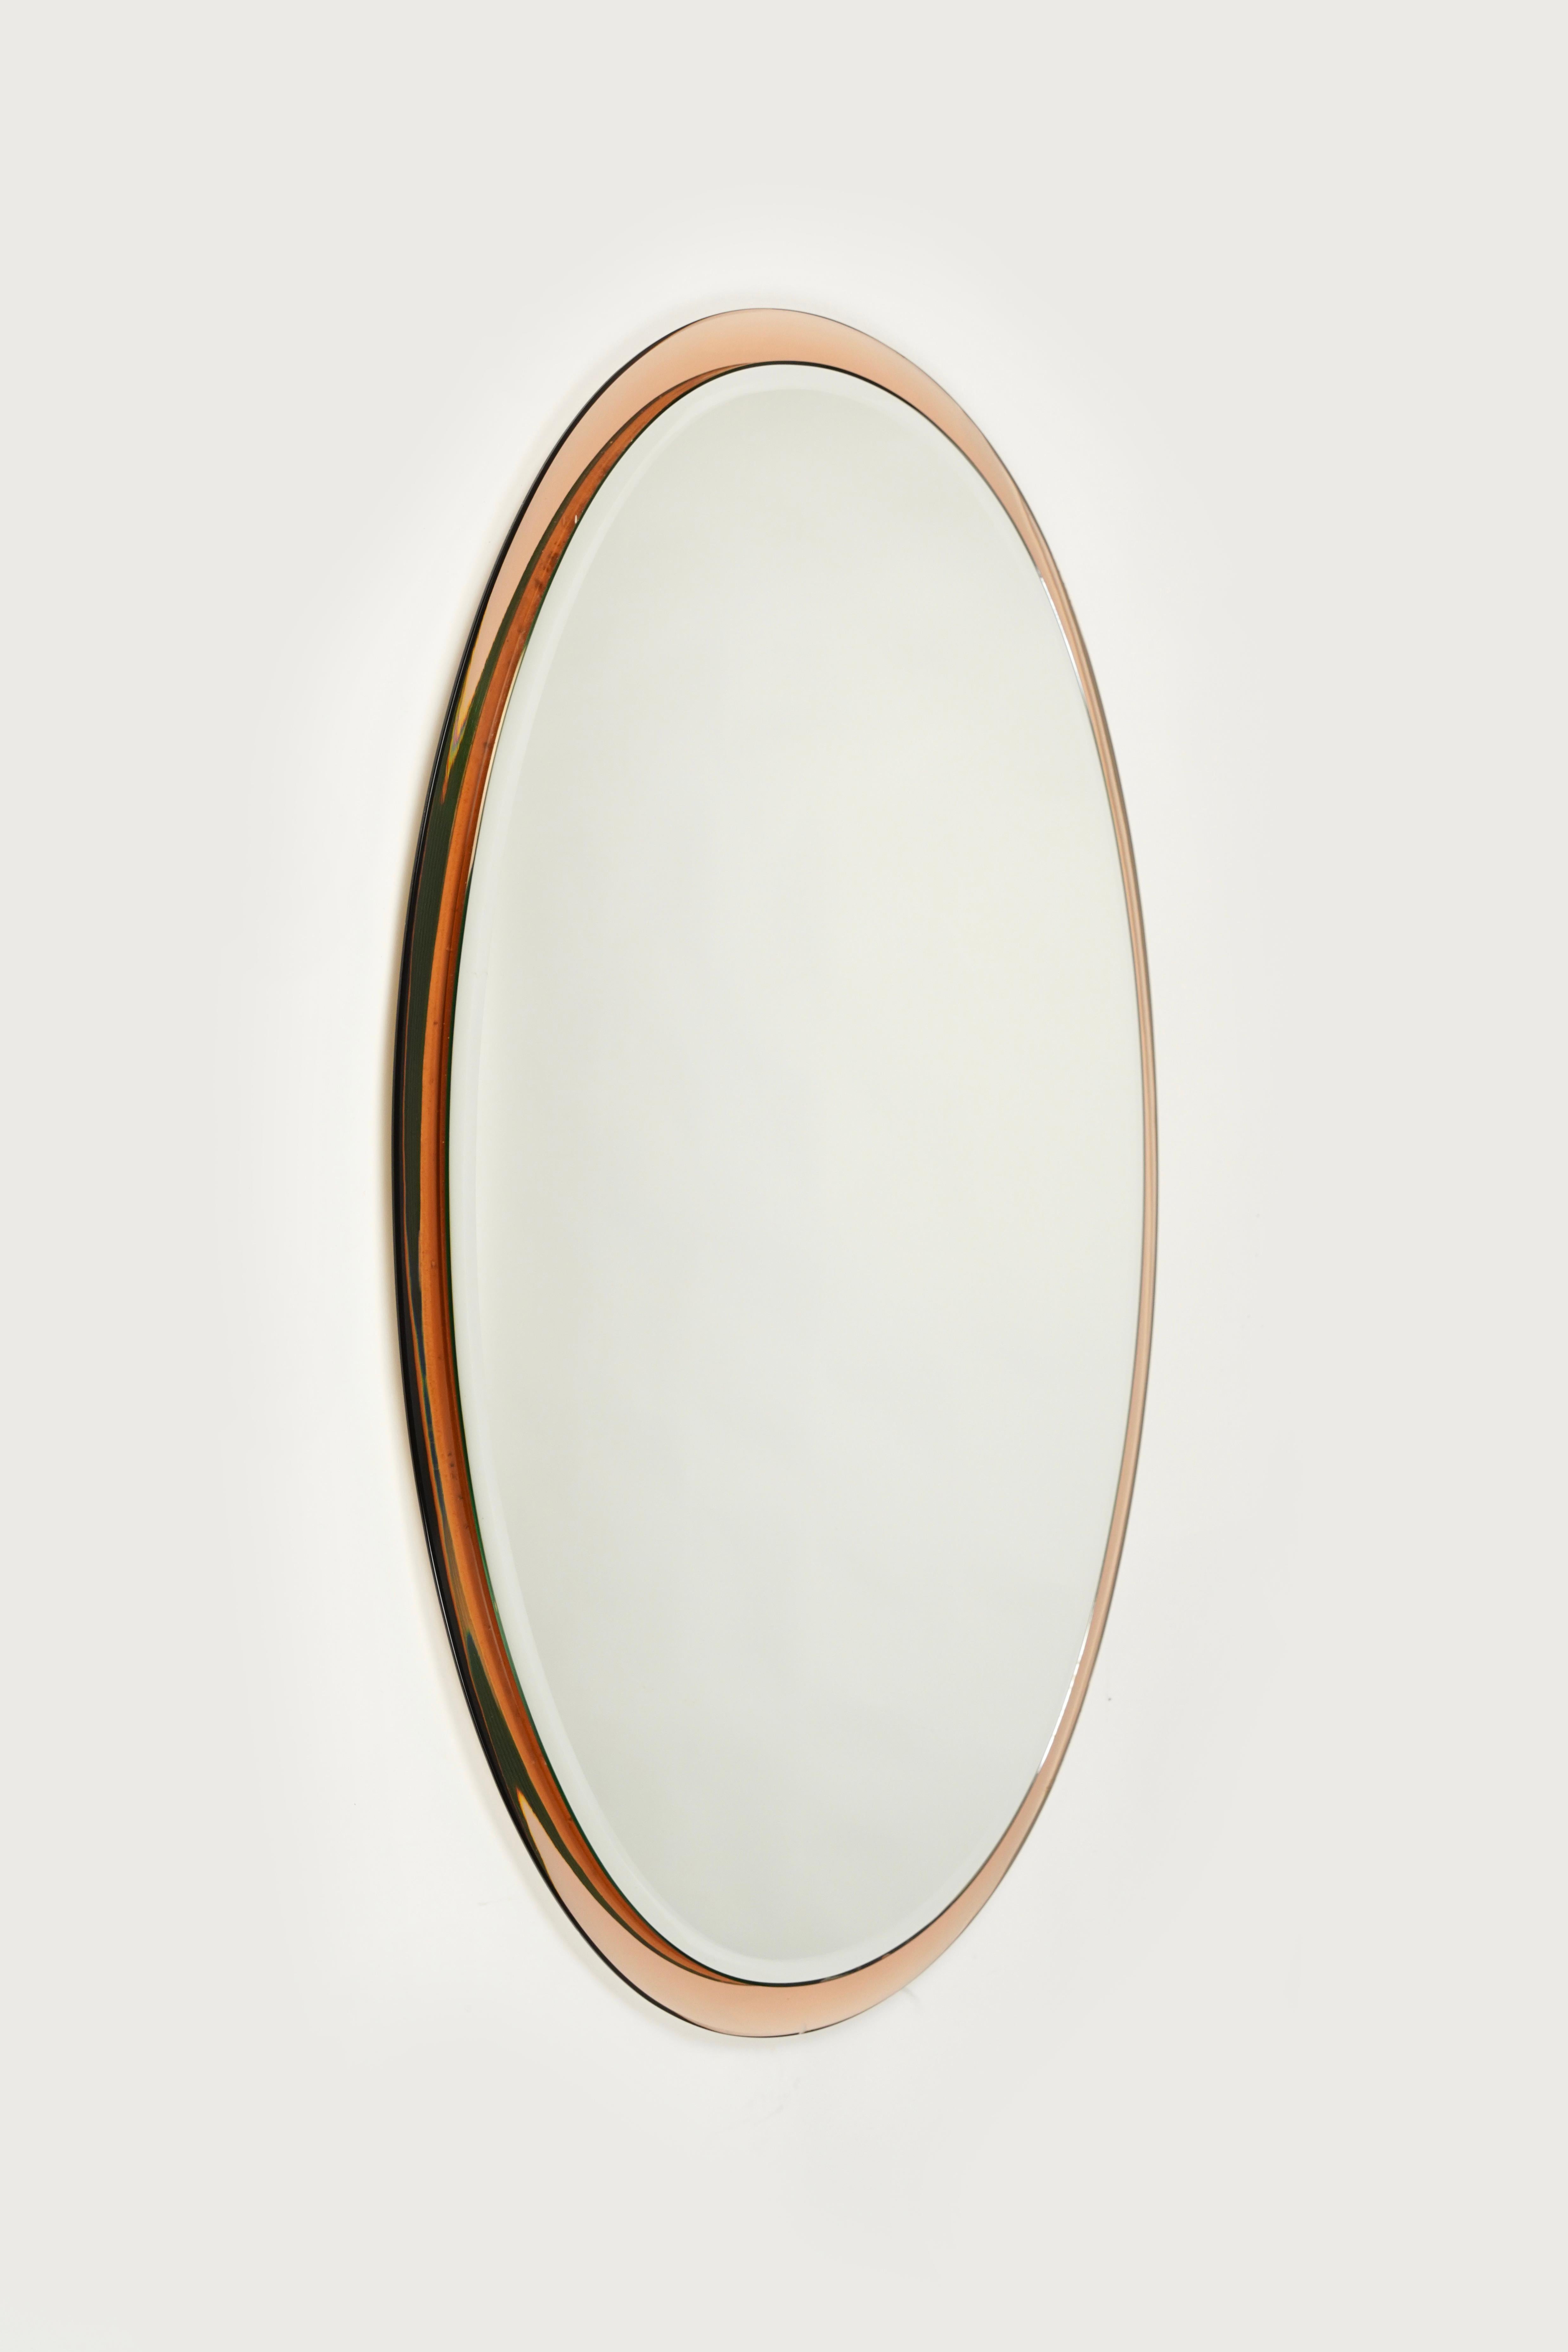 Late 20th Century Mid-Century Oval Pink Wall Mirror by Metalvetro Galvorame, Italy, 1970s For Sale